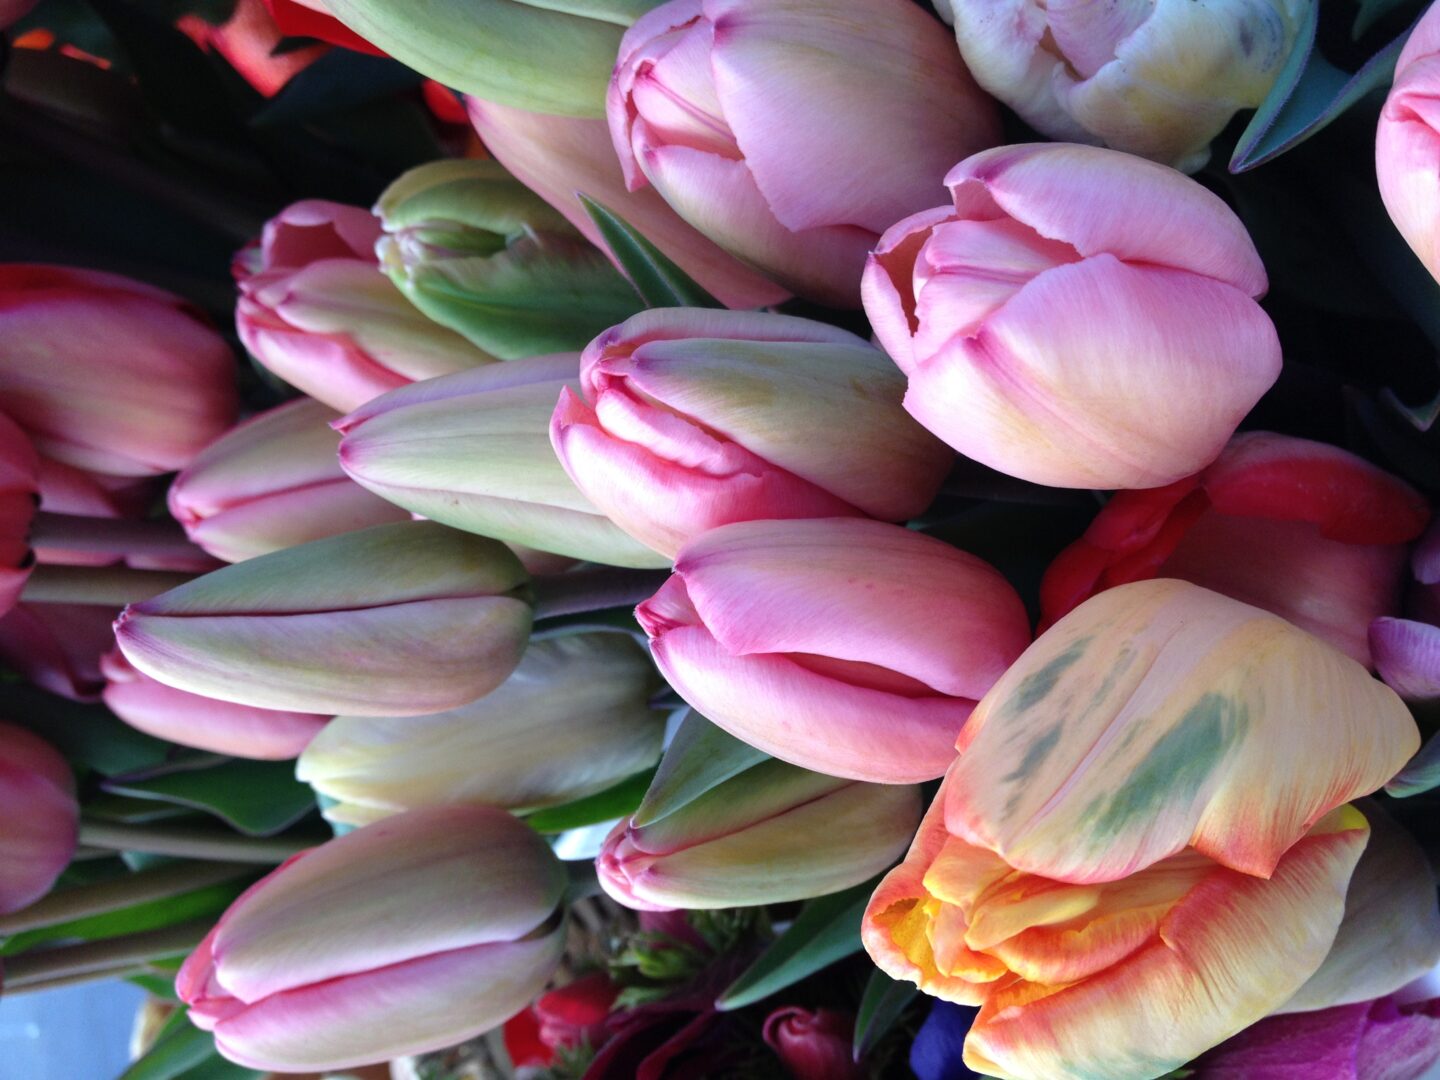 A bunch of tulips in a vase.